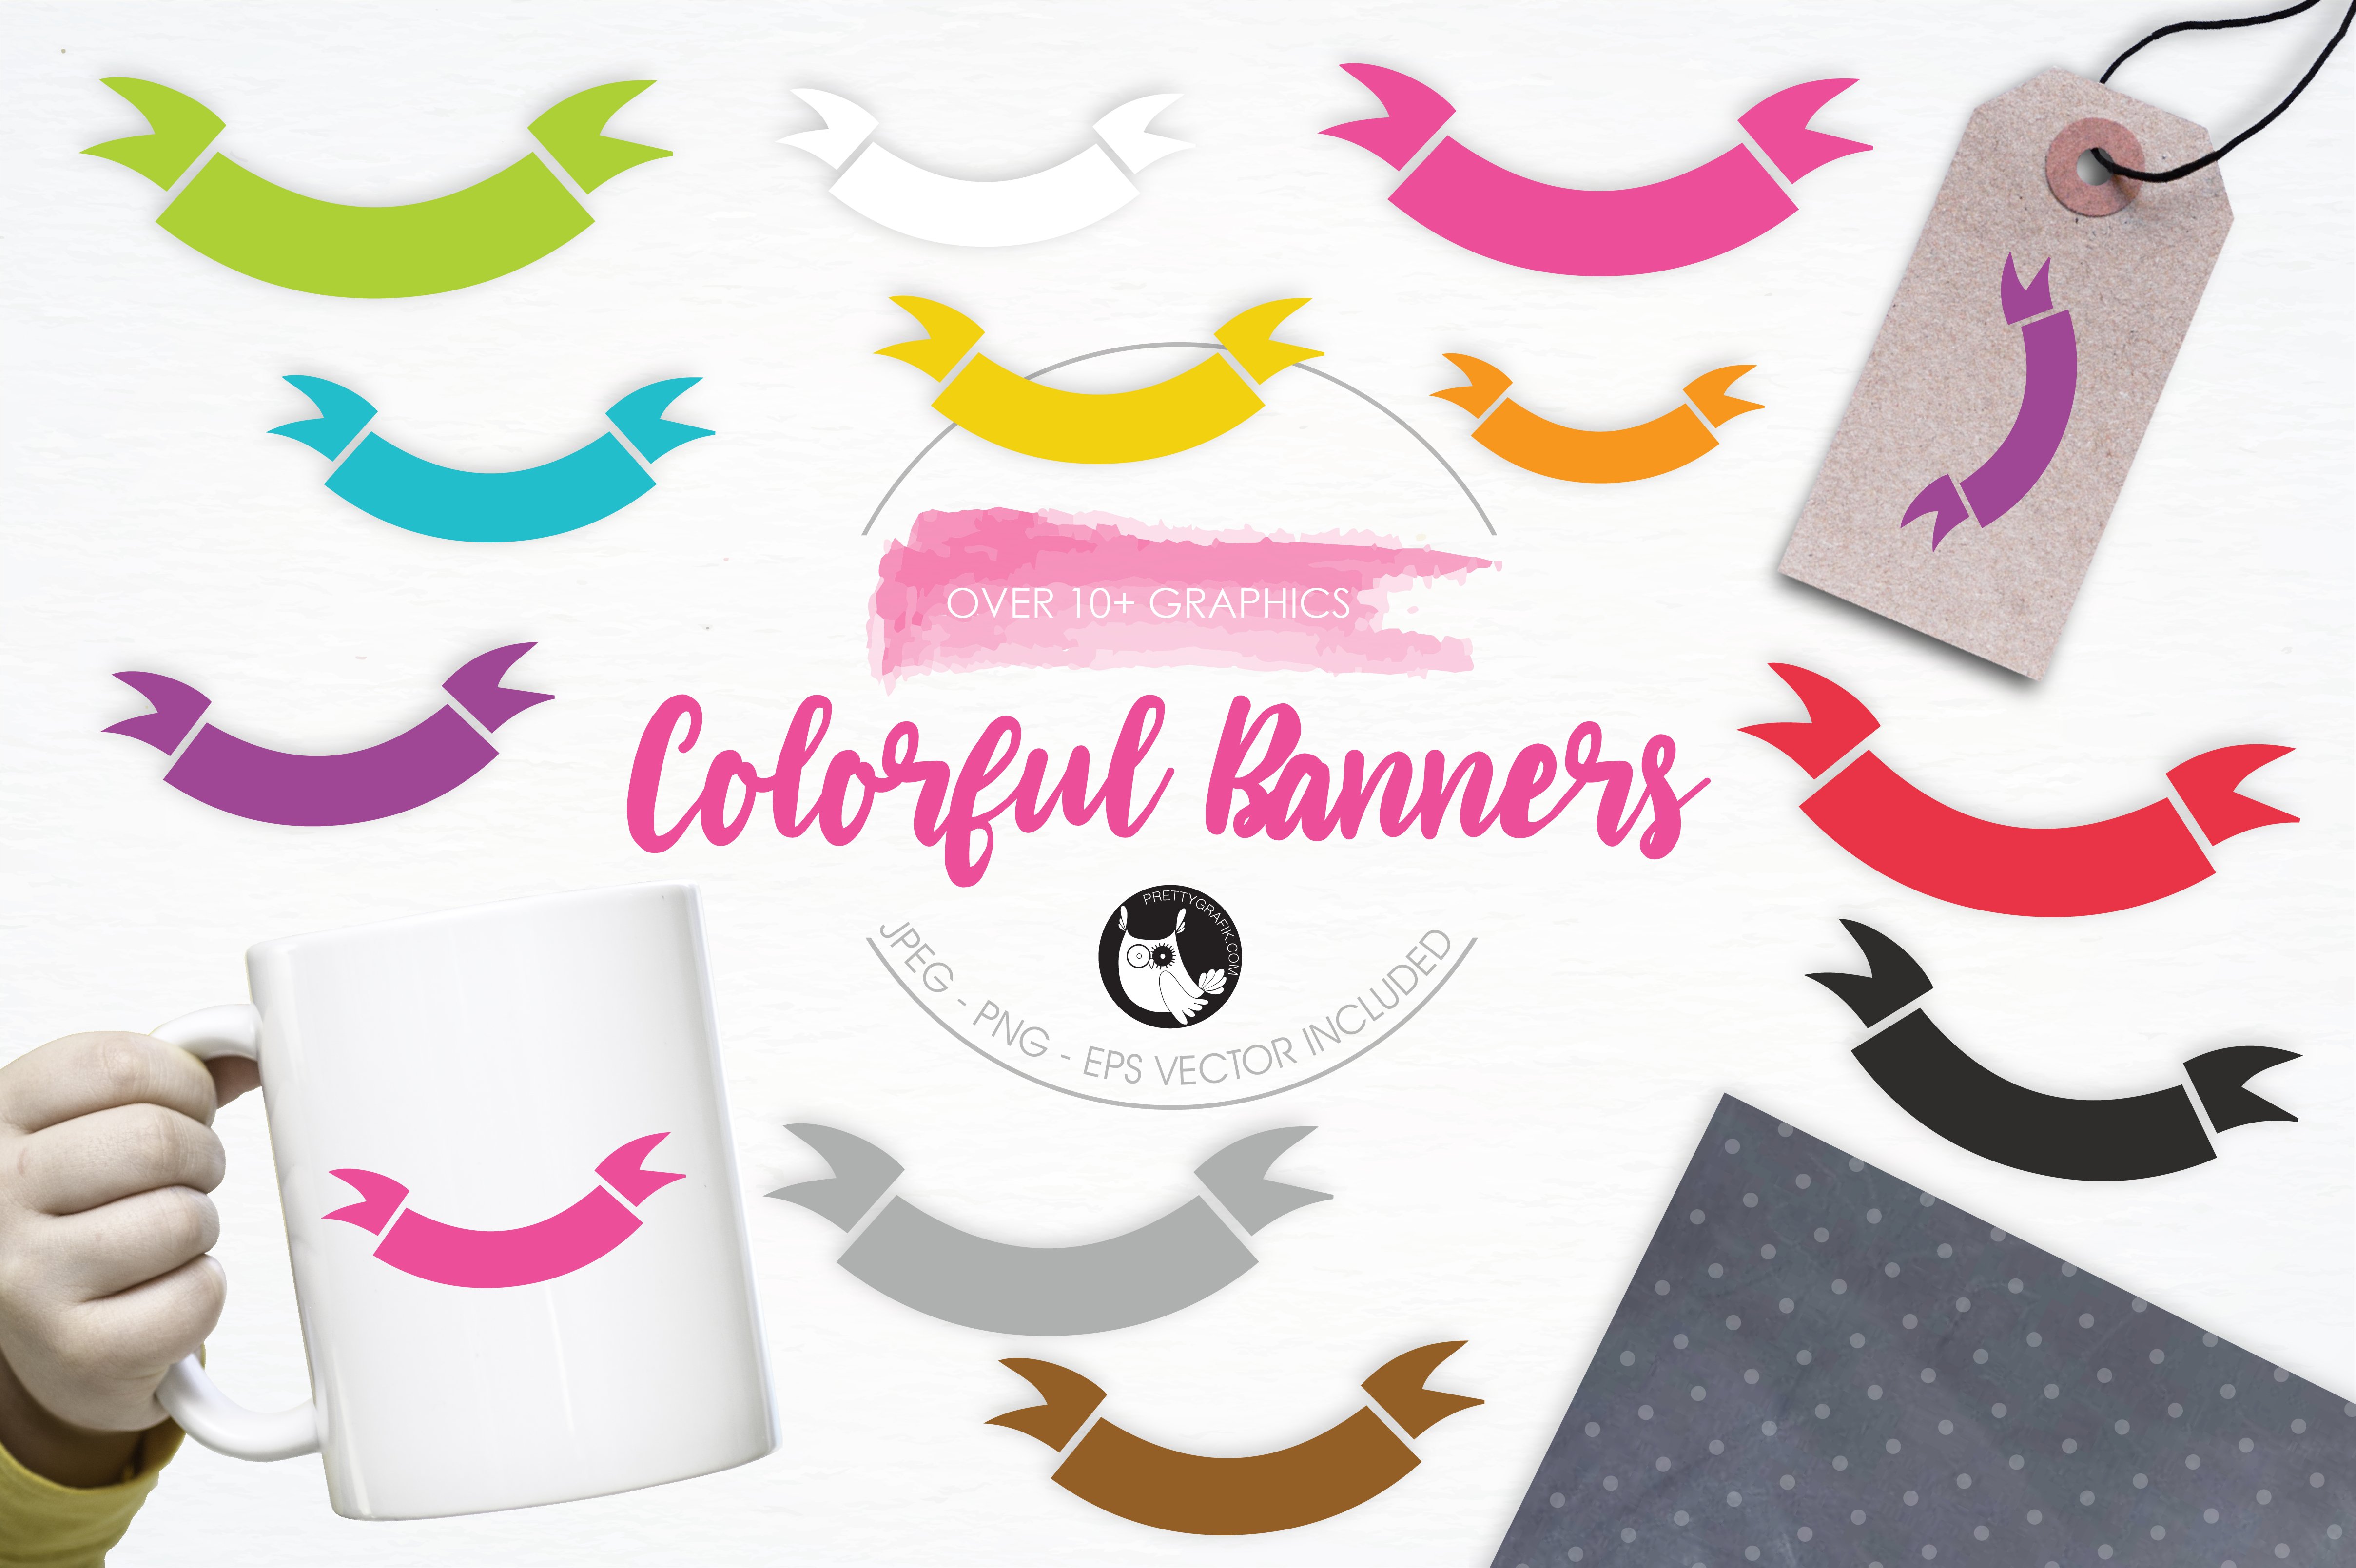 Colorful Banners illustration pack - Vector Image